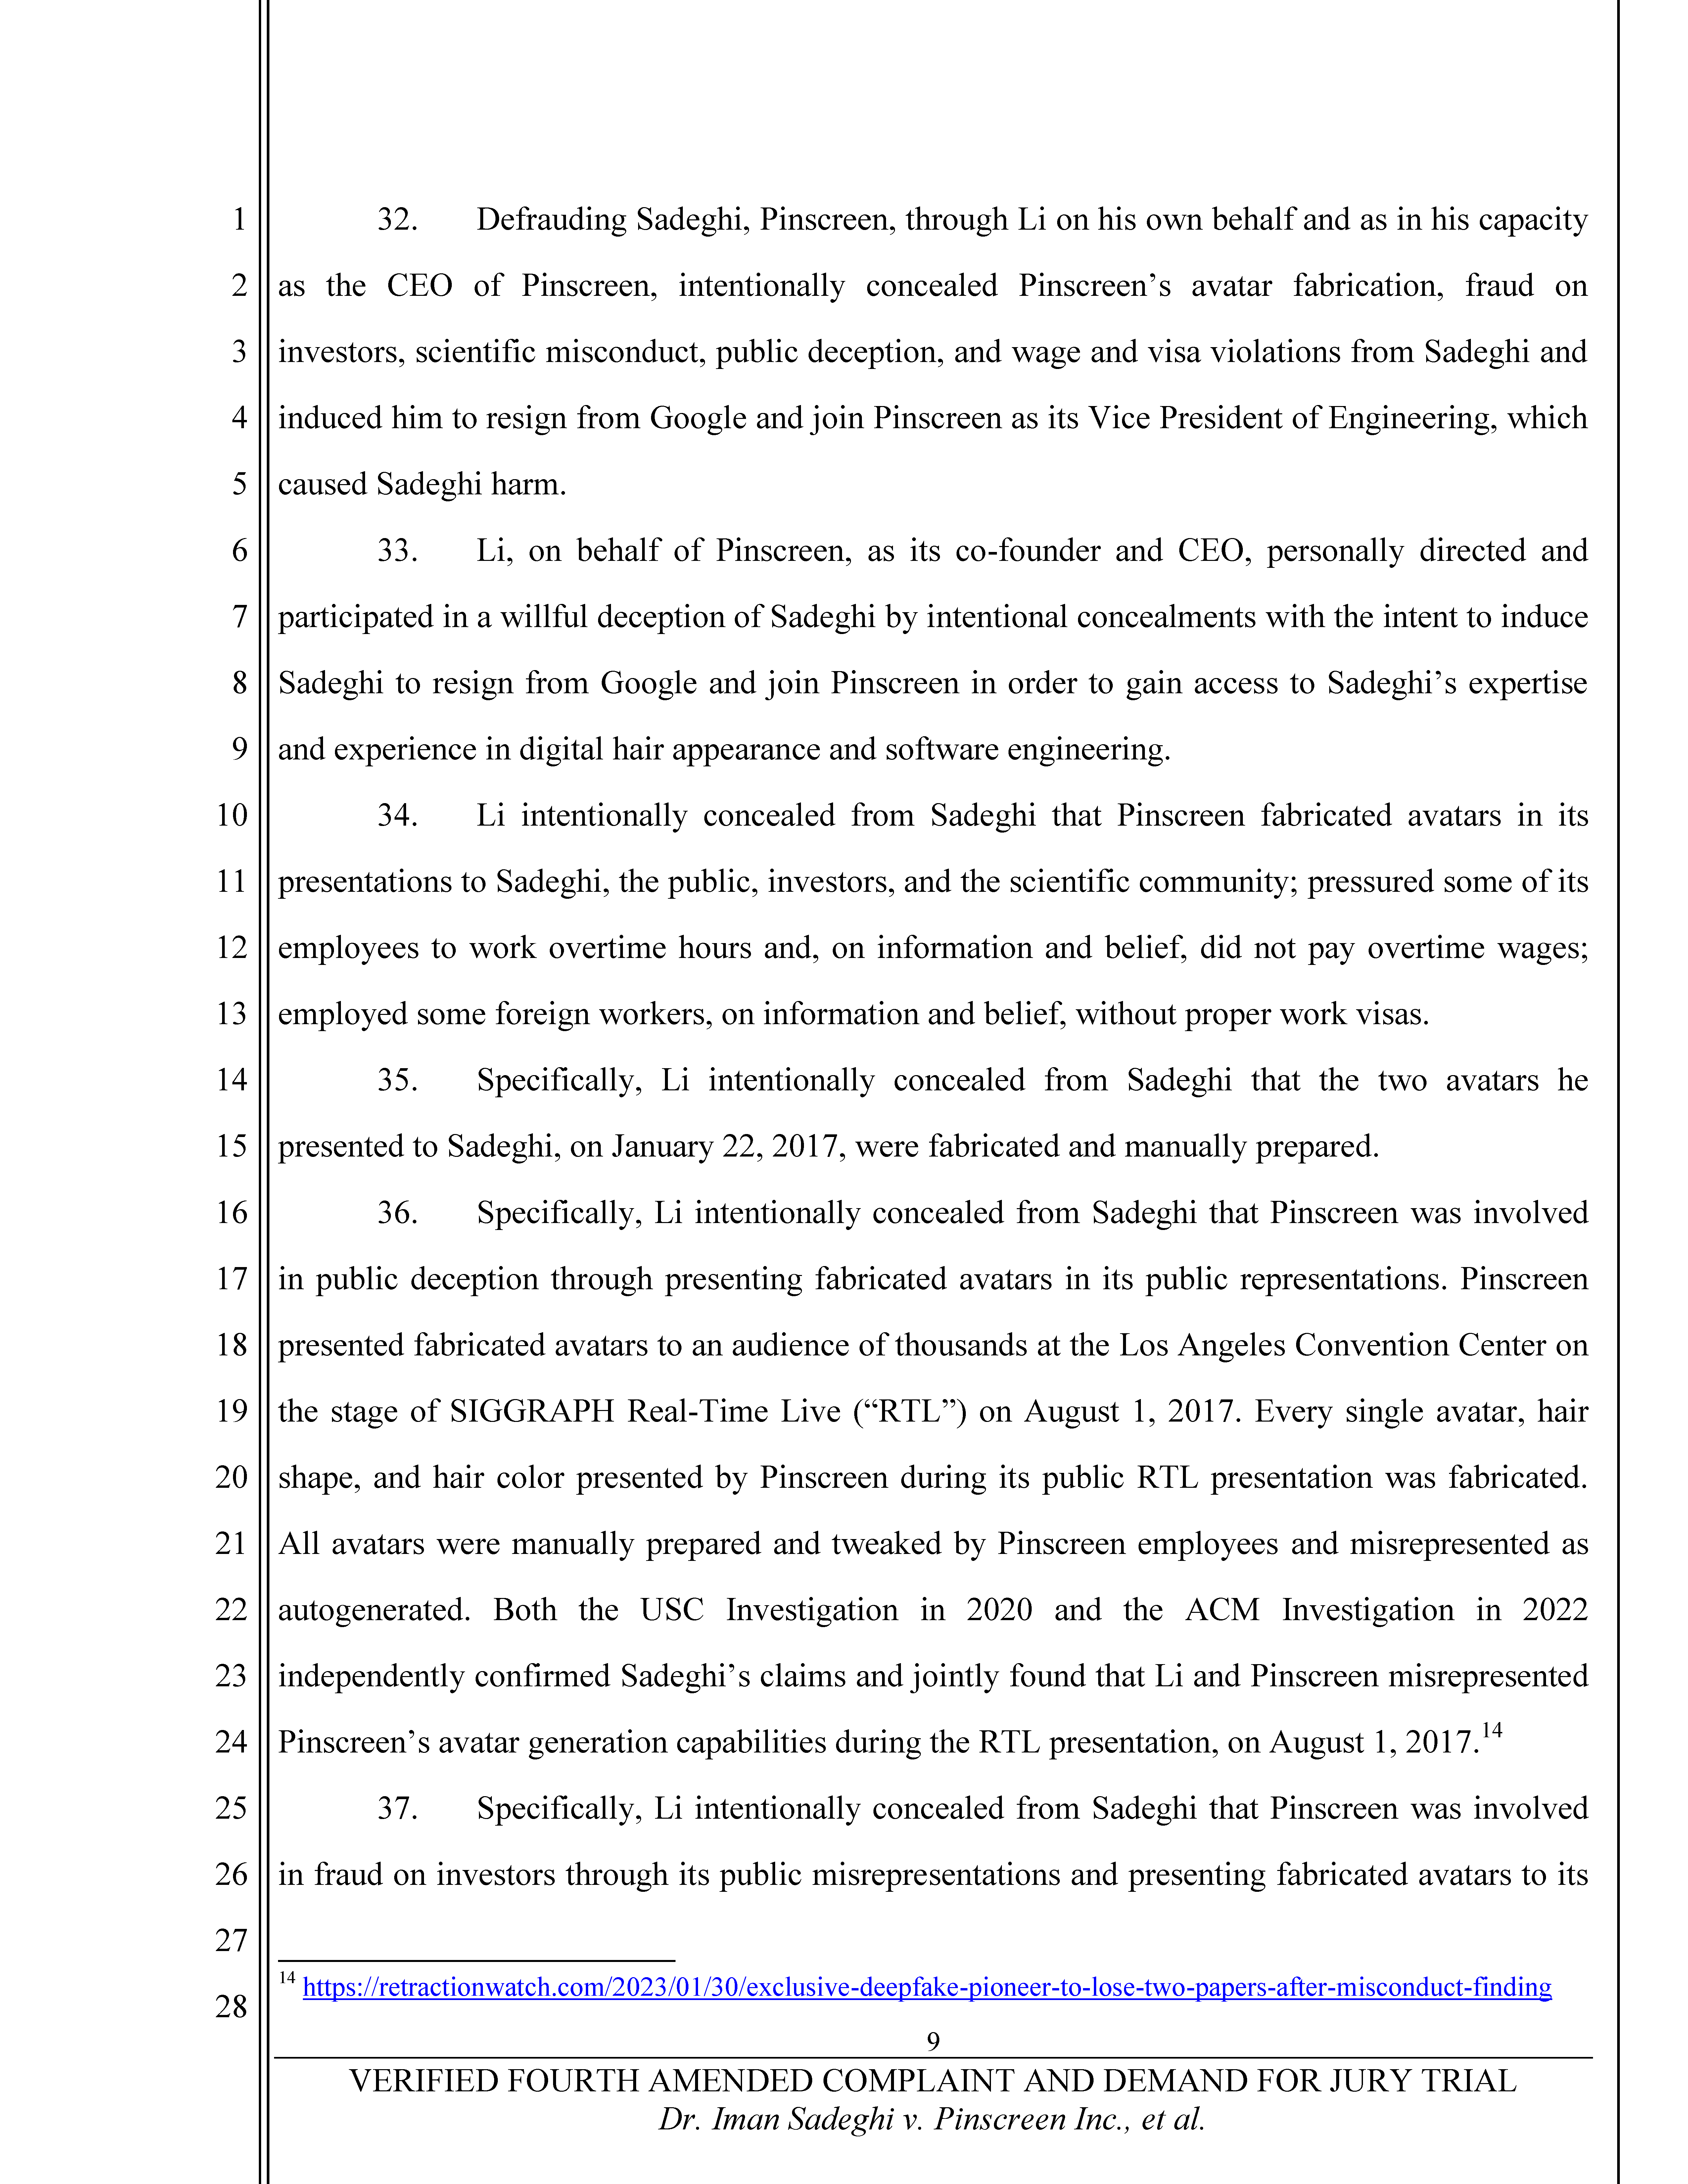 Fourth Amended Complaint (4AC) Page 10